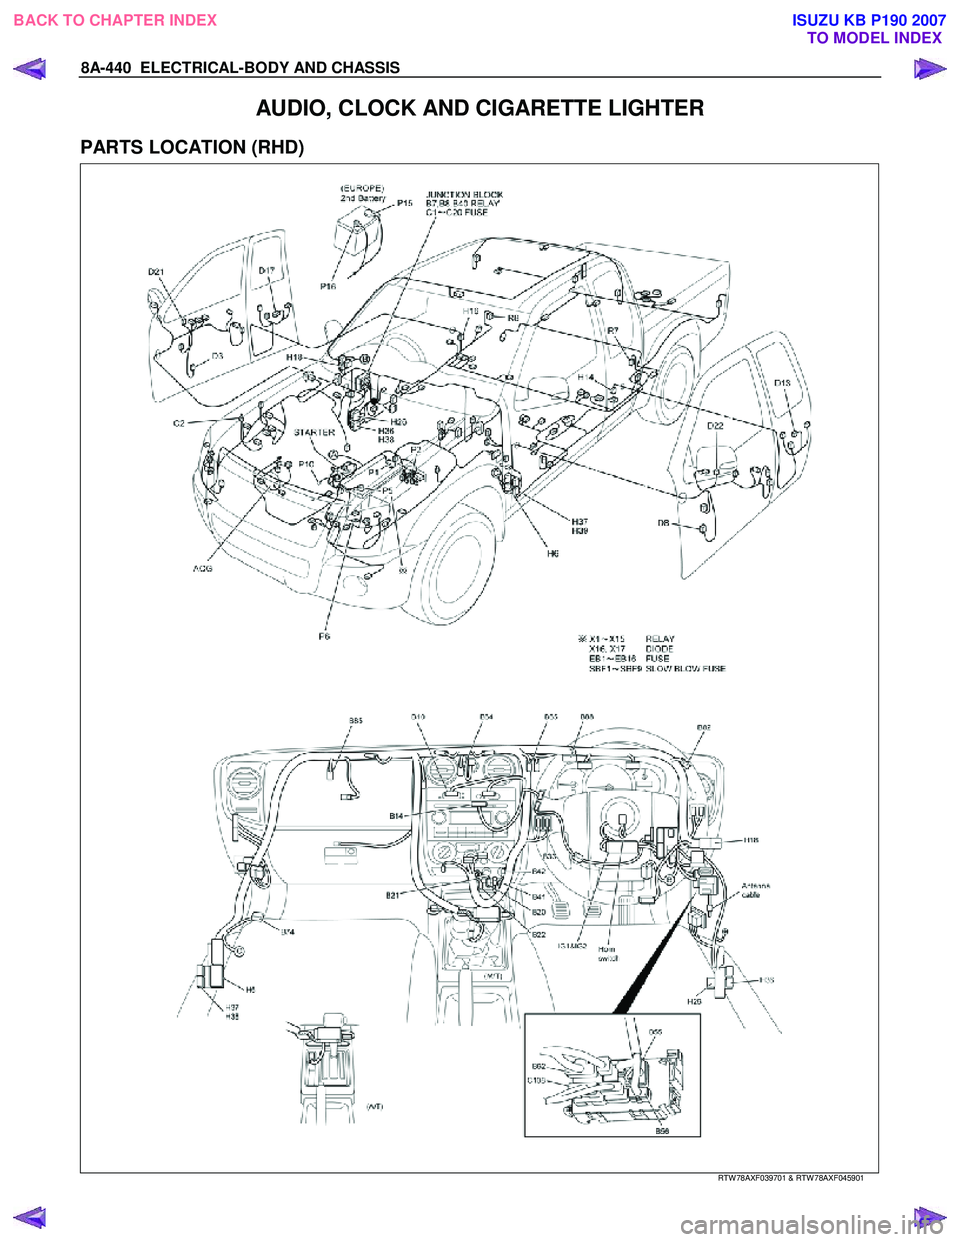 ISUZU KB P190 2007  Workshop Repair Manual 8A-440  ELECTRICAL-BODY AND CHASSIS 
AUDIO, CLOCK AND CIGARETTE LIGHTER 
PARTS LOCATION (RHD) 
  
 
 
 
 
  
   
RTW 78AXF039701 & RTW 78AXF045901 
 
BACK TO CHAPTER INDEX
TO MODEL INDEXISUZU KB P190 